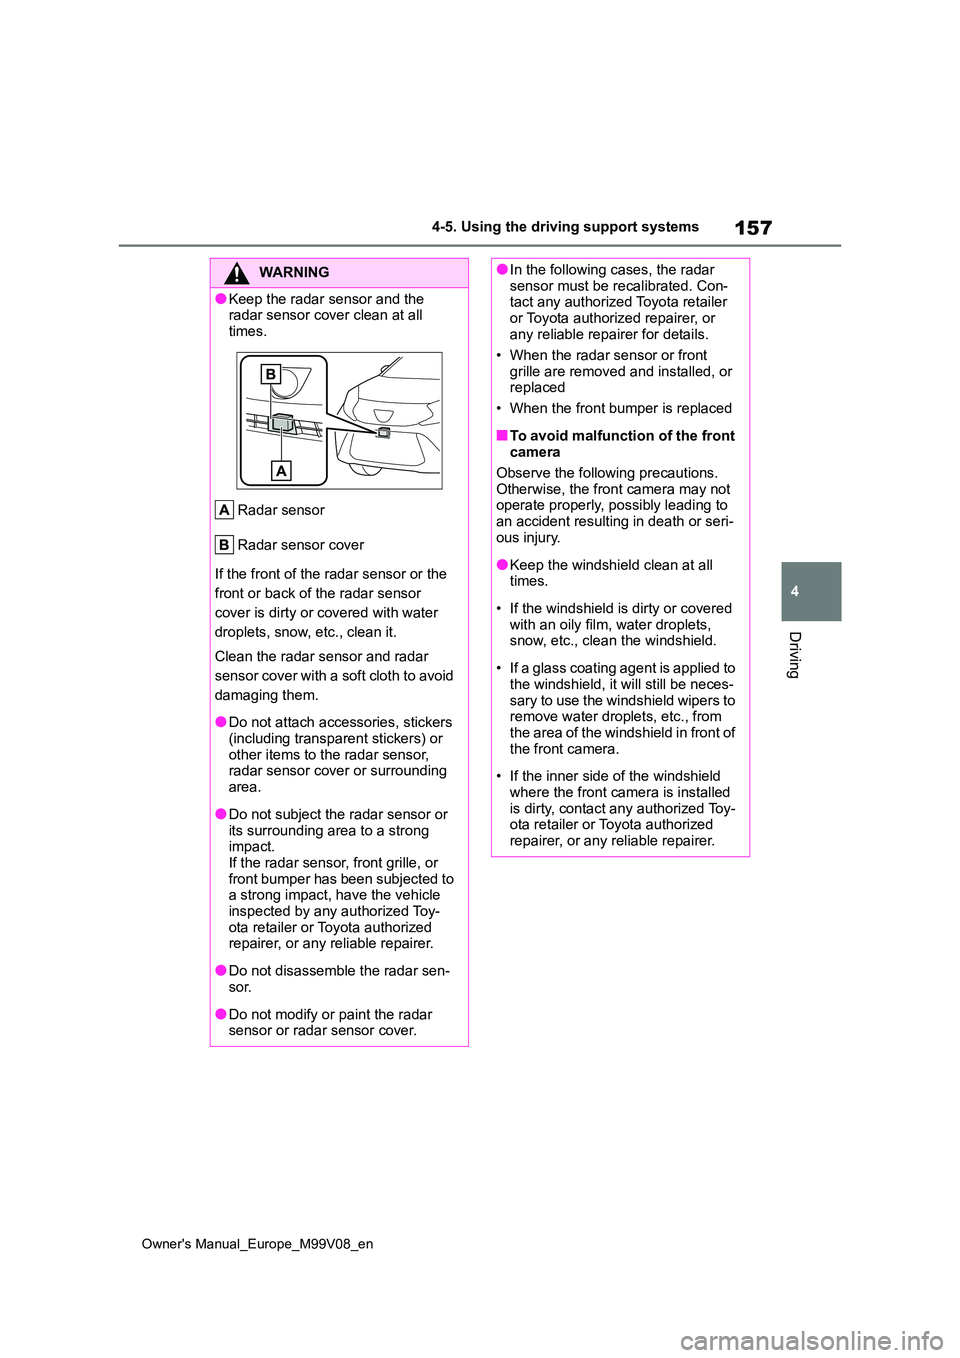 TOYOTA AYGO X 2022  Owners Manual (in English) 157
4
Owner's Manual_Europe_M99V08_en
4-5. Using the driving support systems
Driving
WARNING
●Keep the radar sensor and the  radar sensor cover clean at all  
times. 
Radar sensor 
Radar sensor 